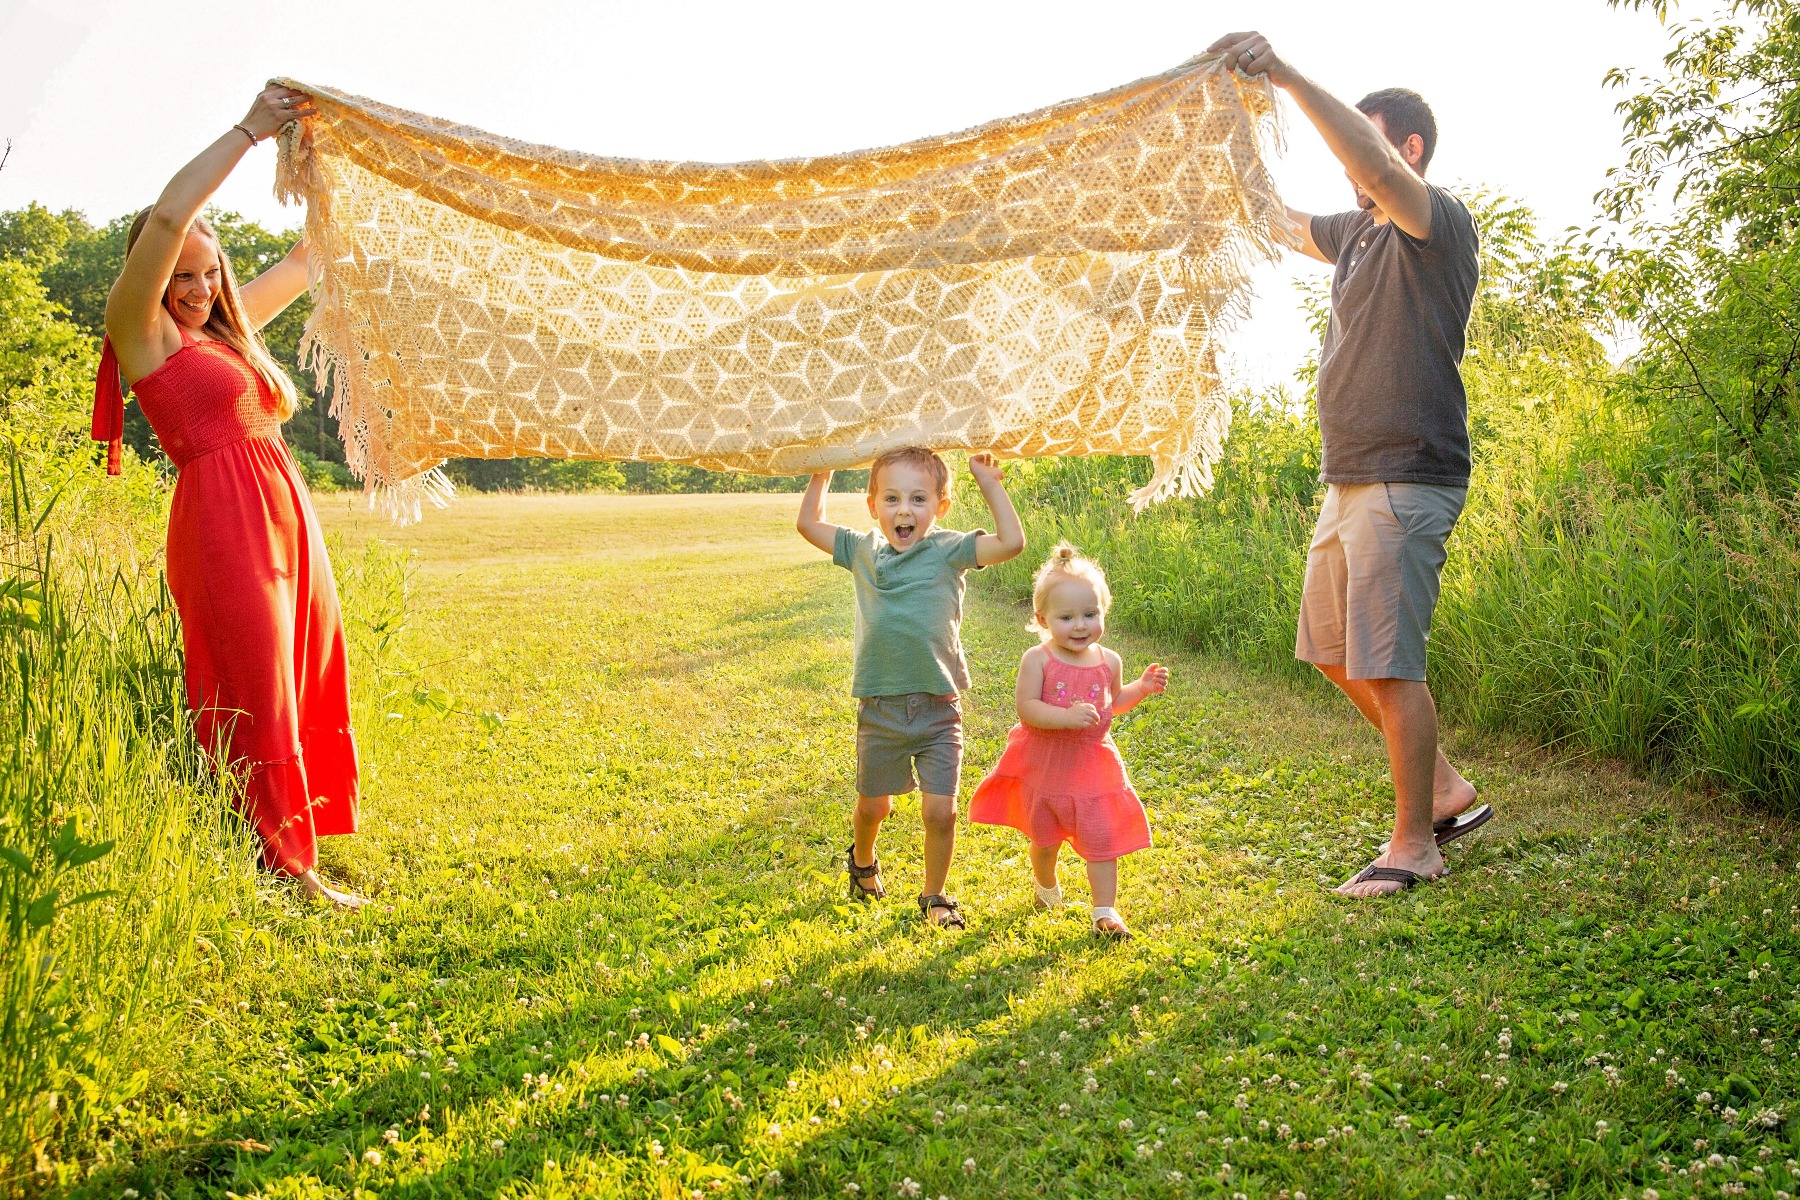 mom & dad hold blanket up as two young children play under it